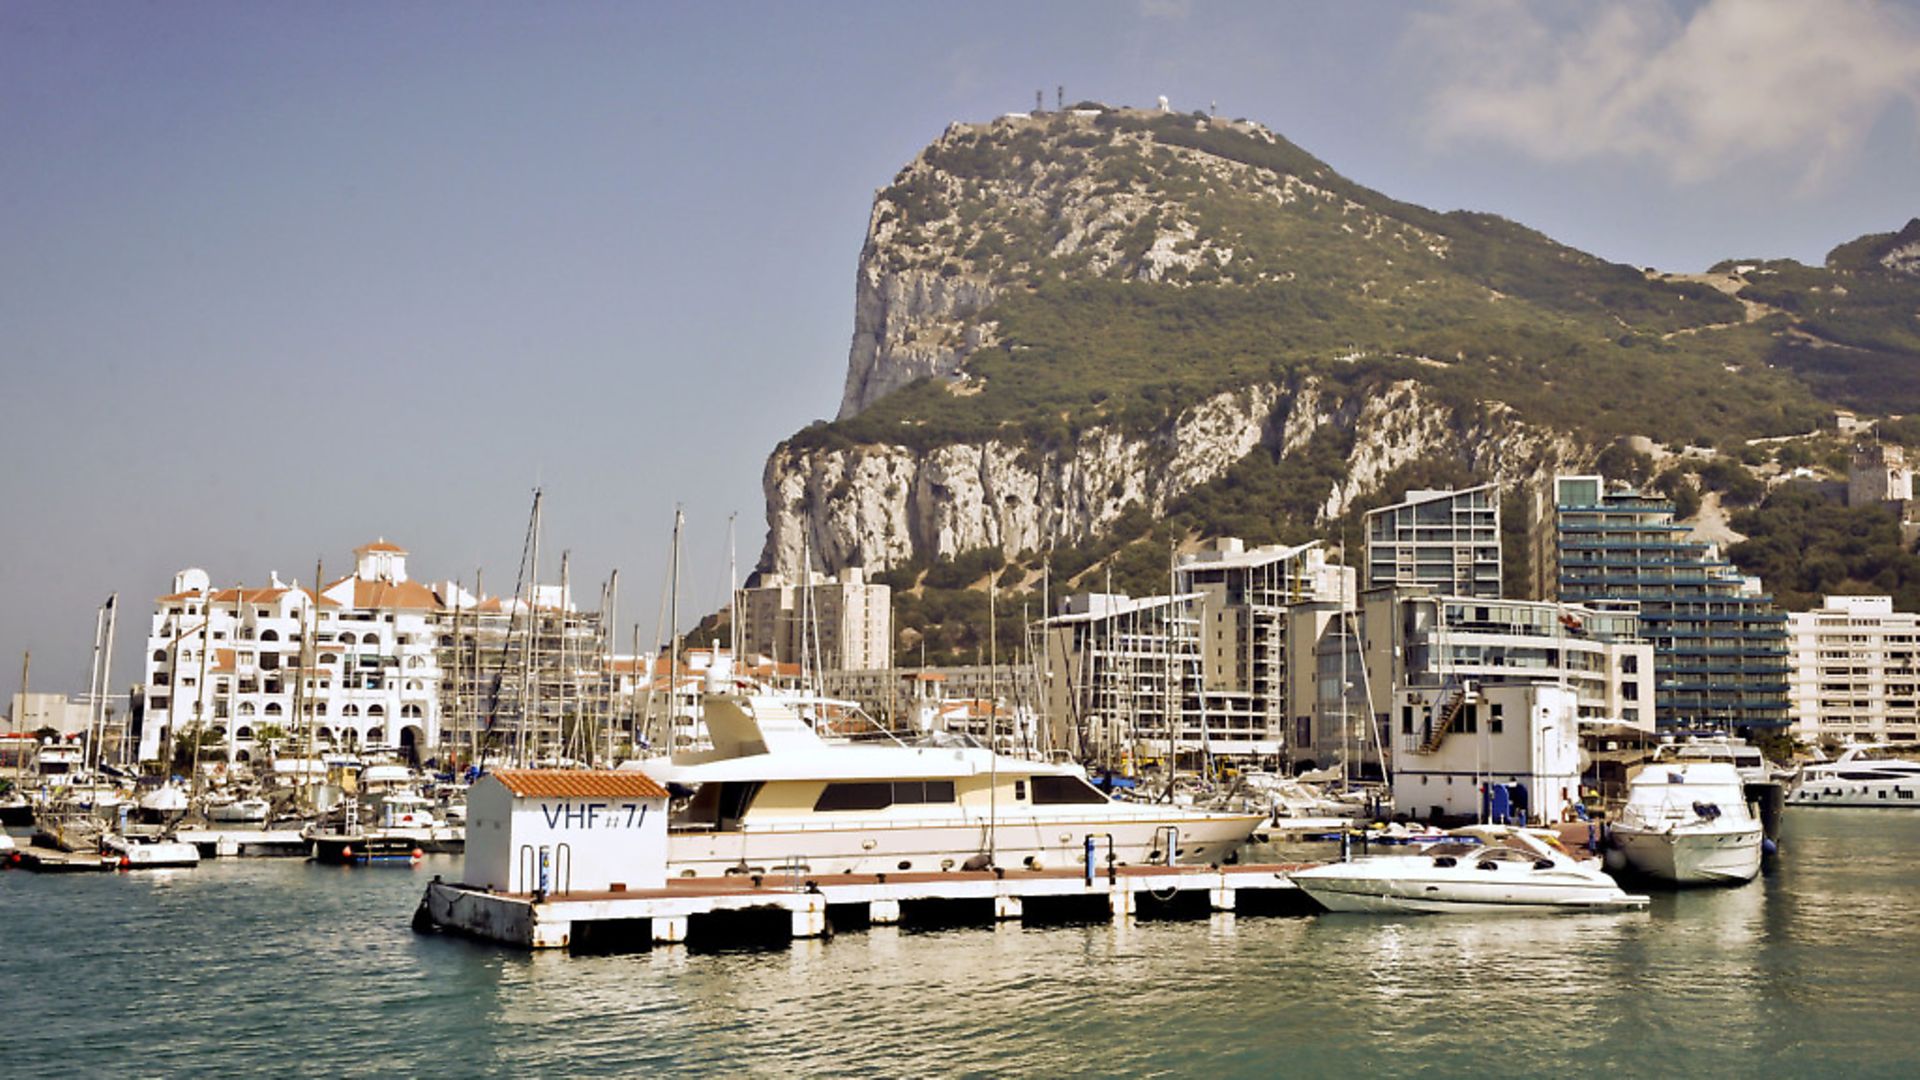 A general view of buildings and the marina in front of the Rock of Gibraltar. - Credit: PA